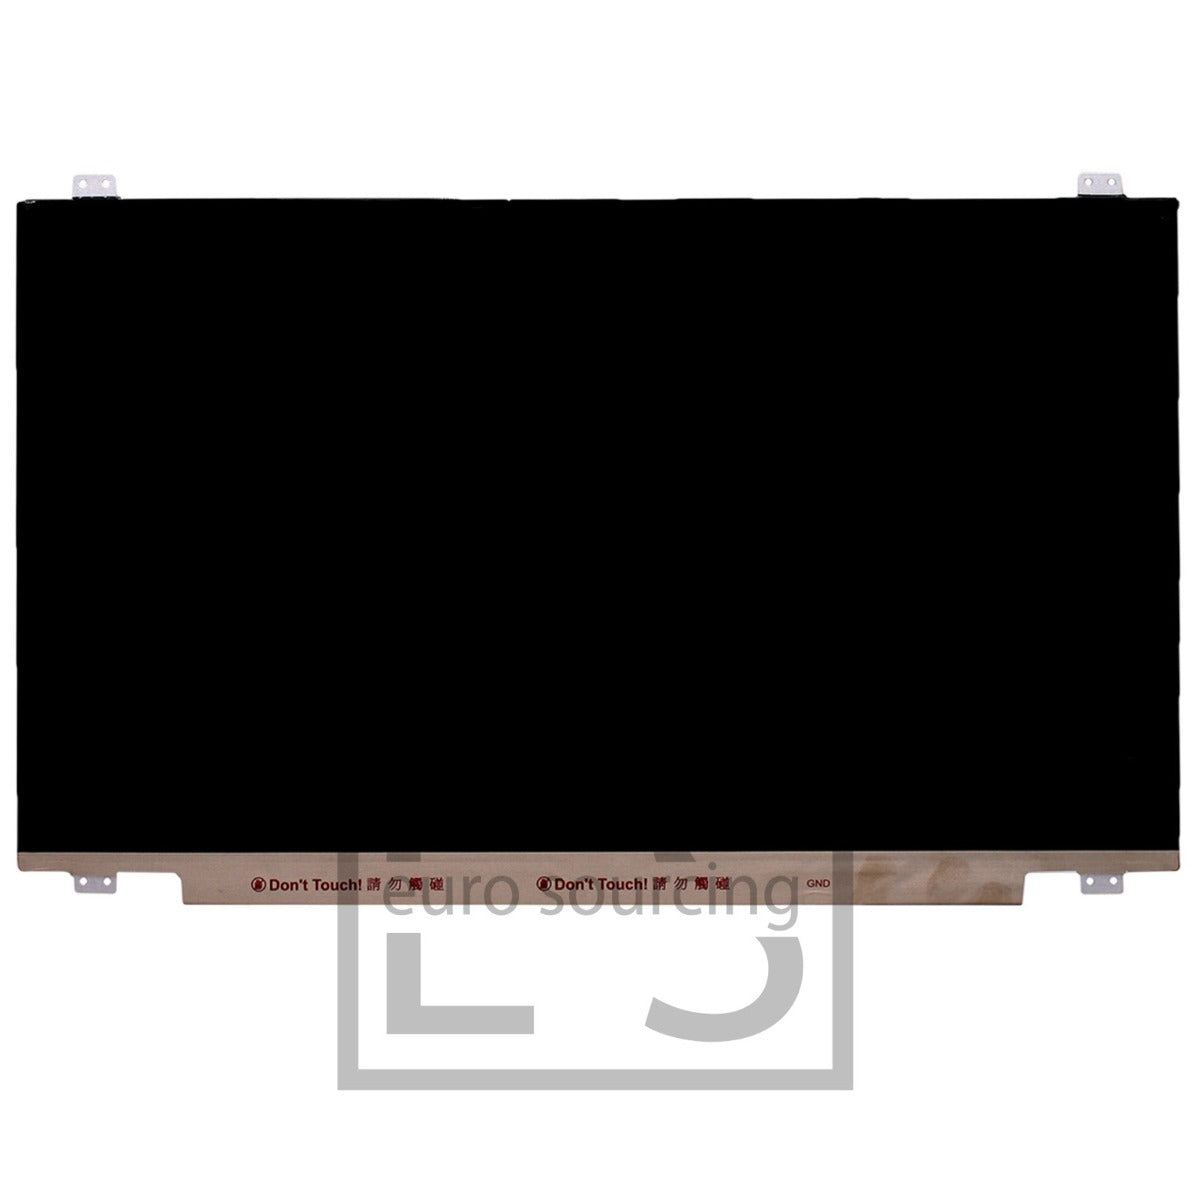 Replacement For B173RTN02.1 17.3" LED SLIM 30 PIN EDP WXGA++ Matte Screen Display Panel Compatible With DELL PRECISION M7720